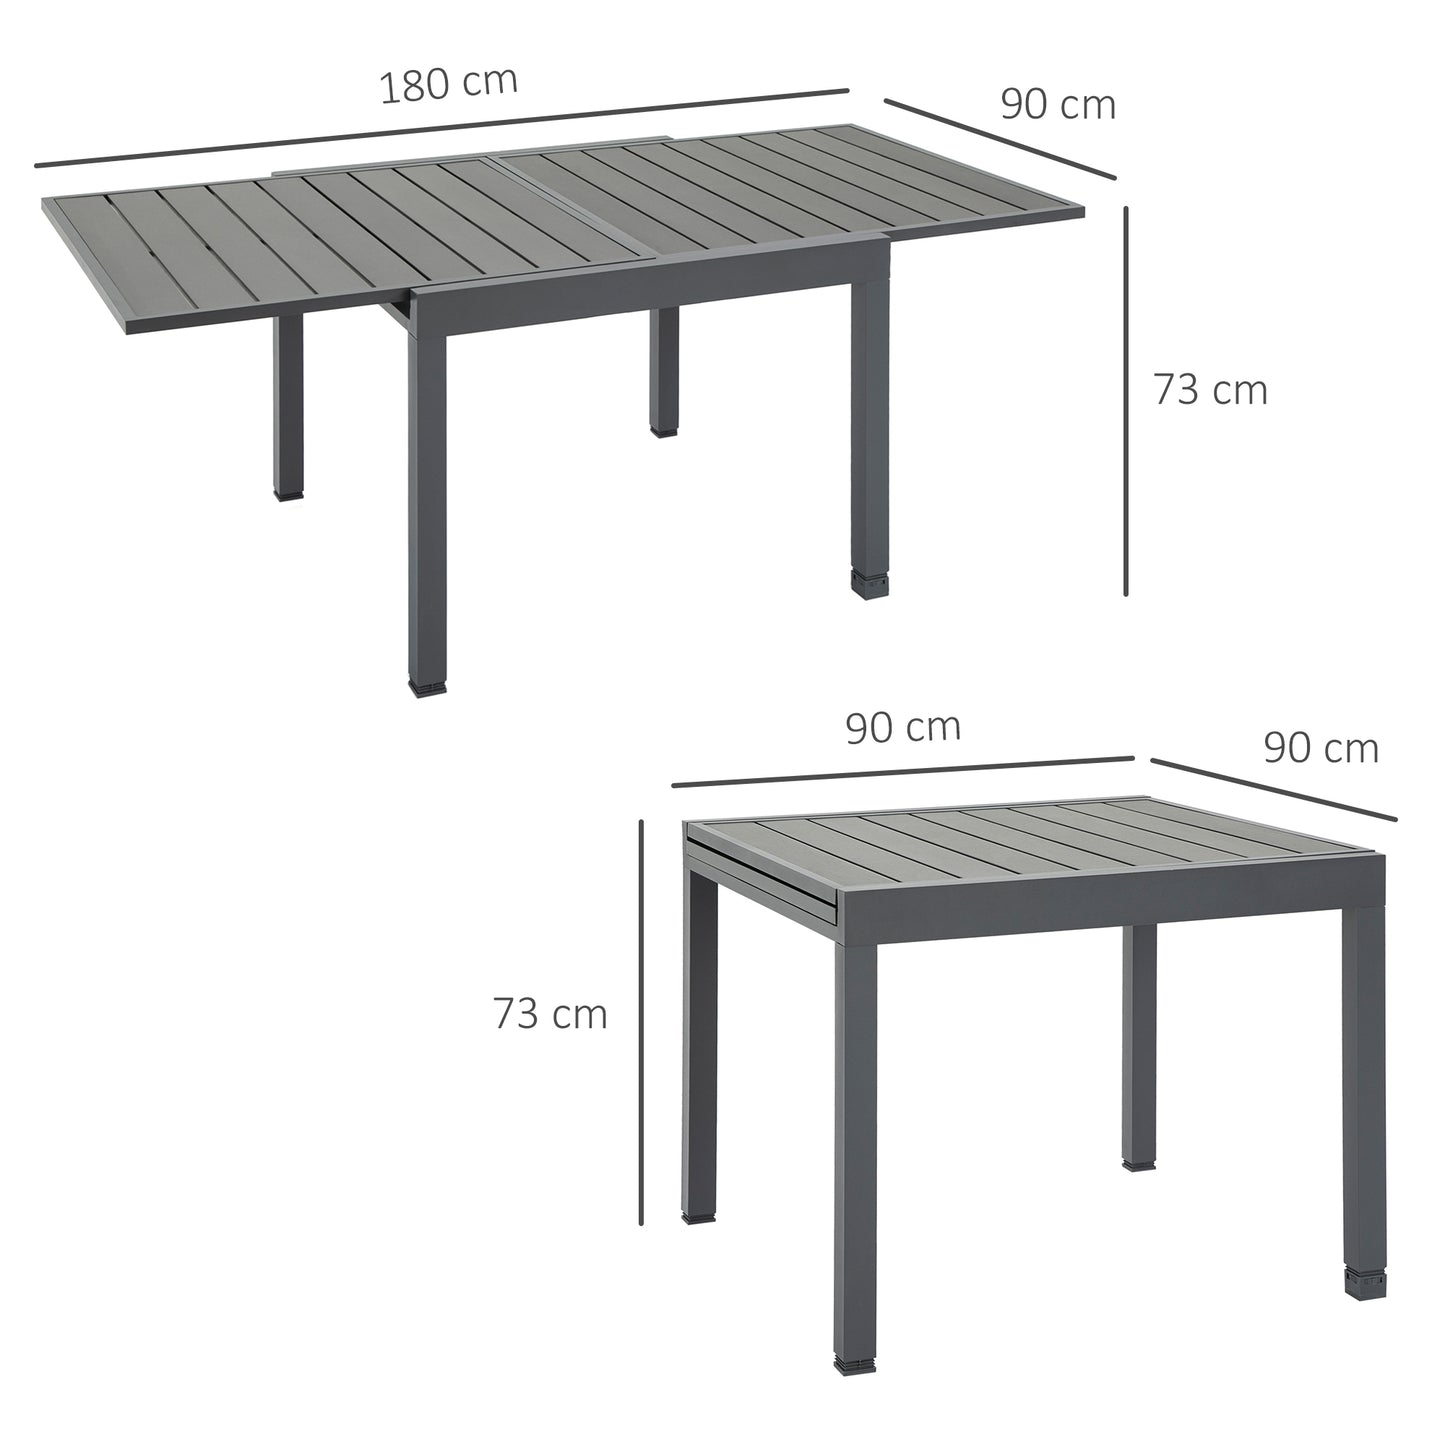 Outsunny Expandable Dining Table Metal Outdoor Slat Table for 4-6 Person Rectangular Lawn Garden Bistro Patio Table with Aluminum Frame, Grey